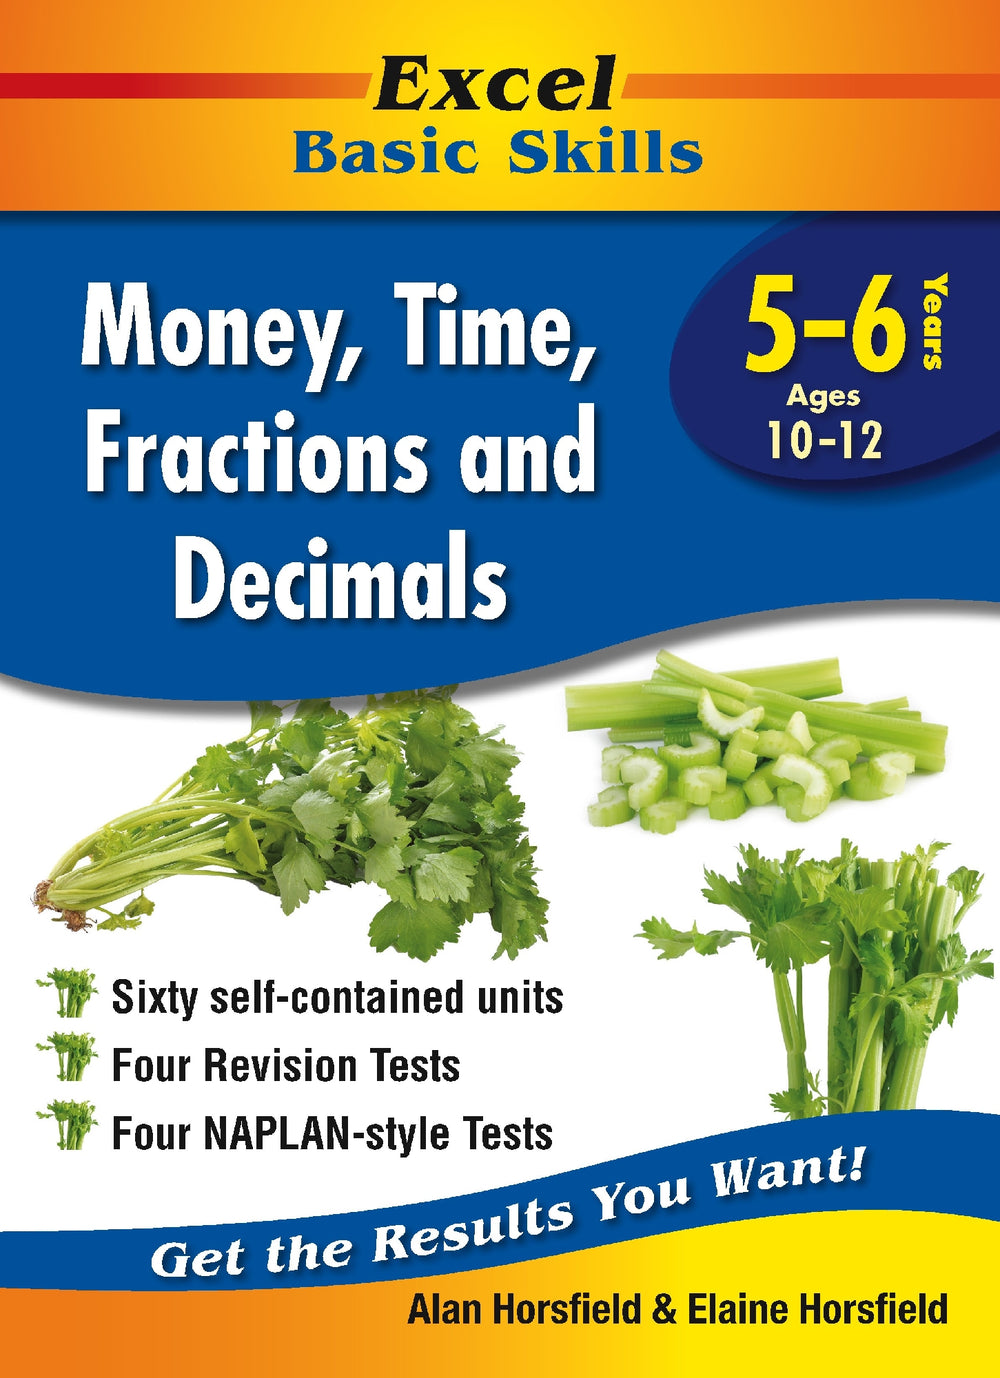 Excel Basic Skills Workbook: Money, Time, Fractions and Decimals Years 5-6